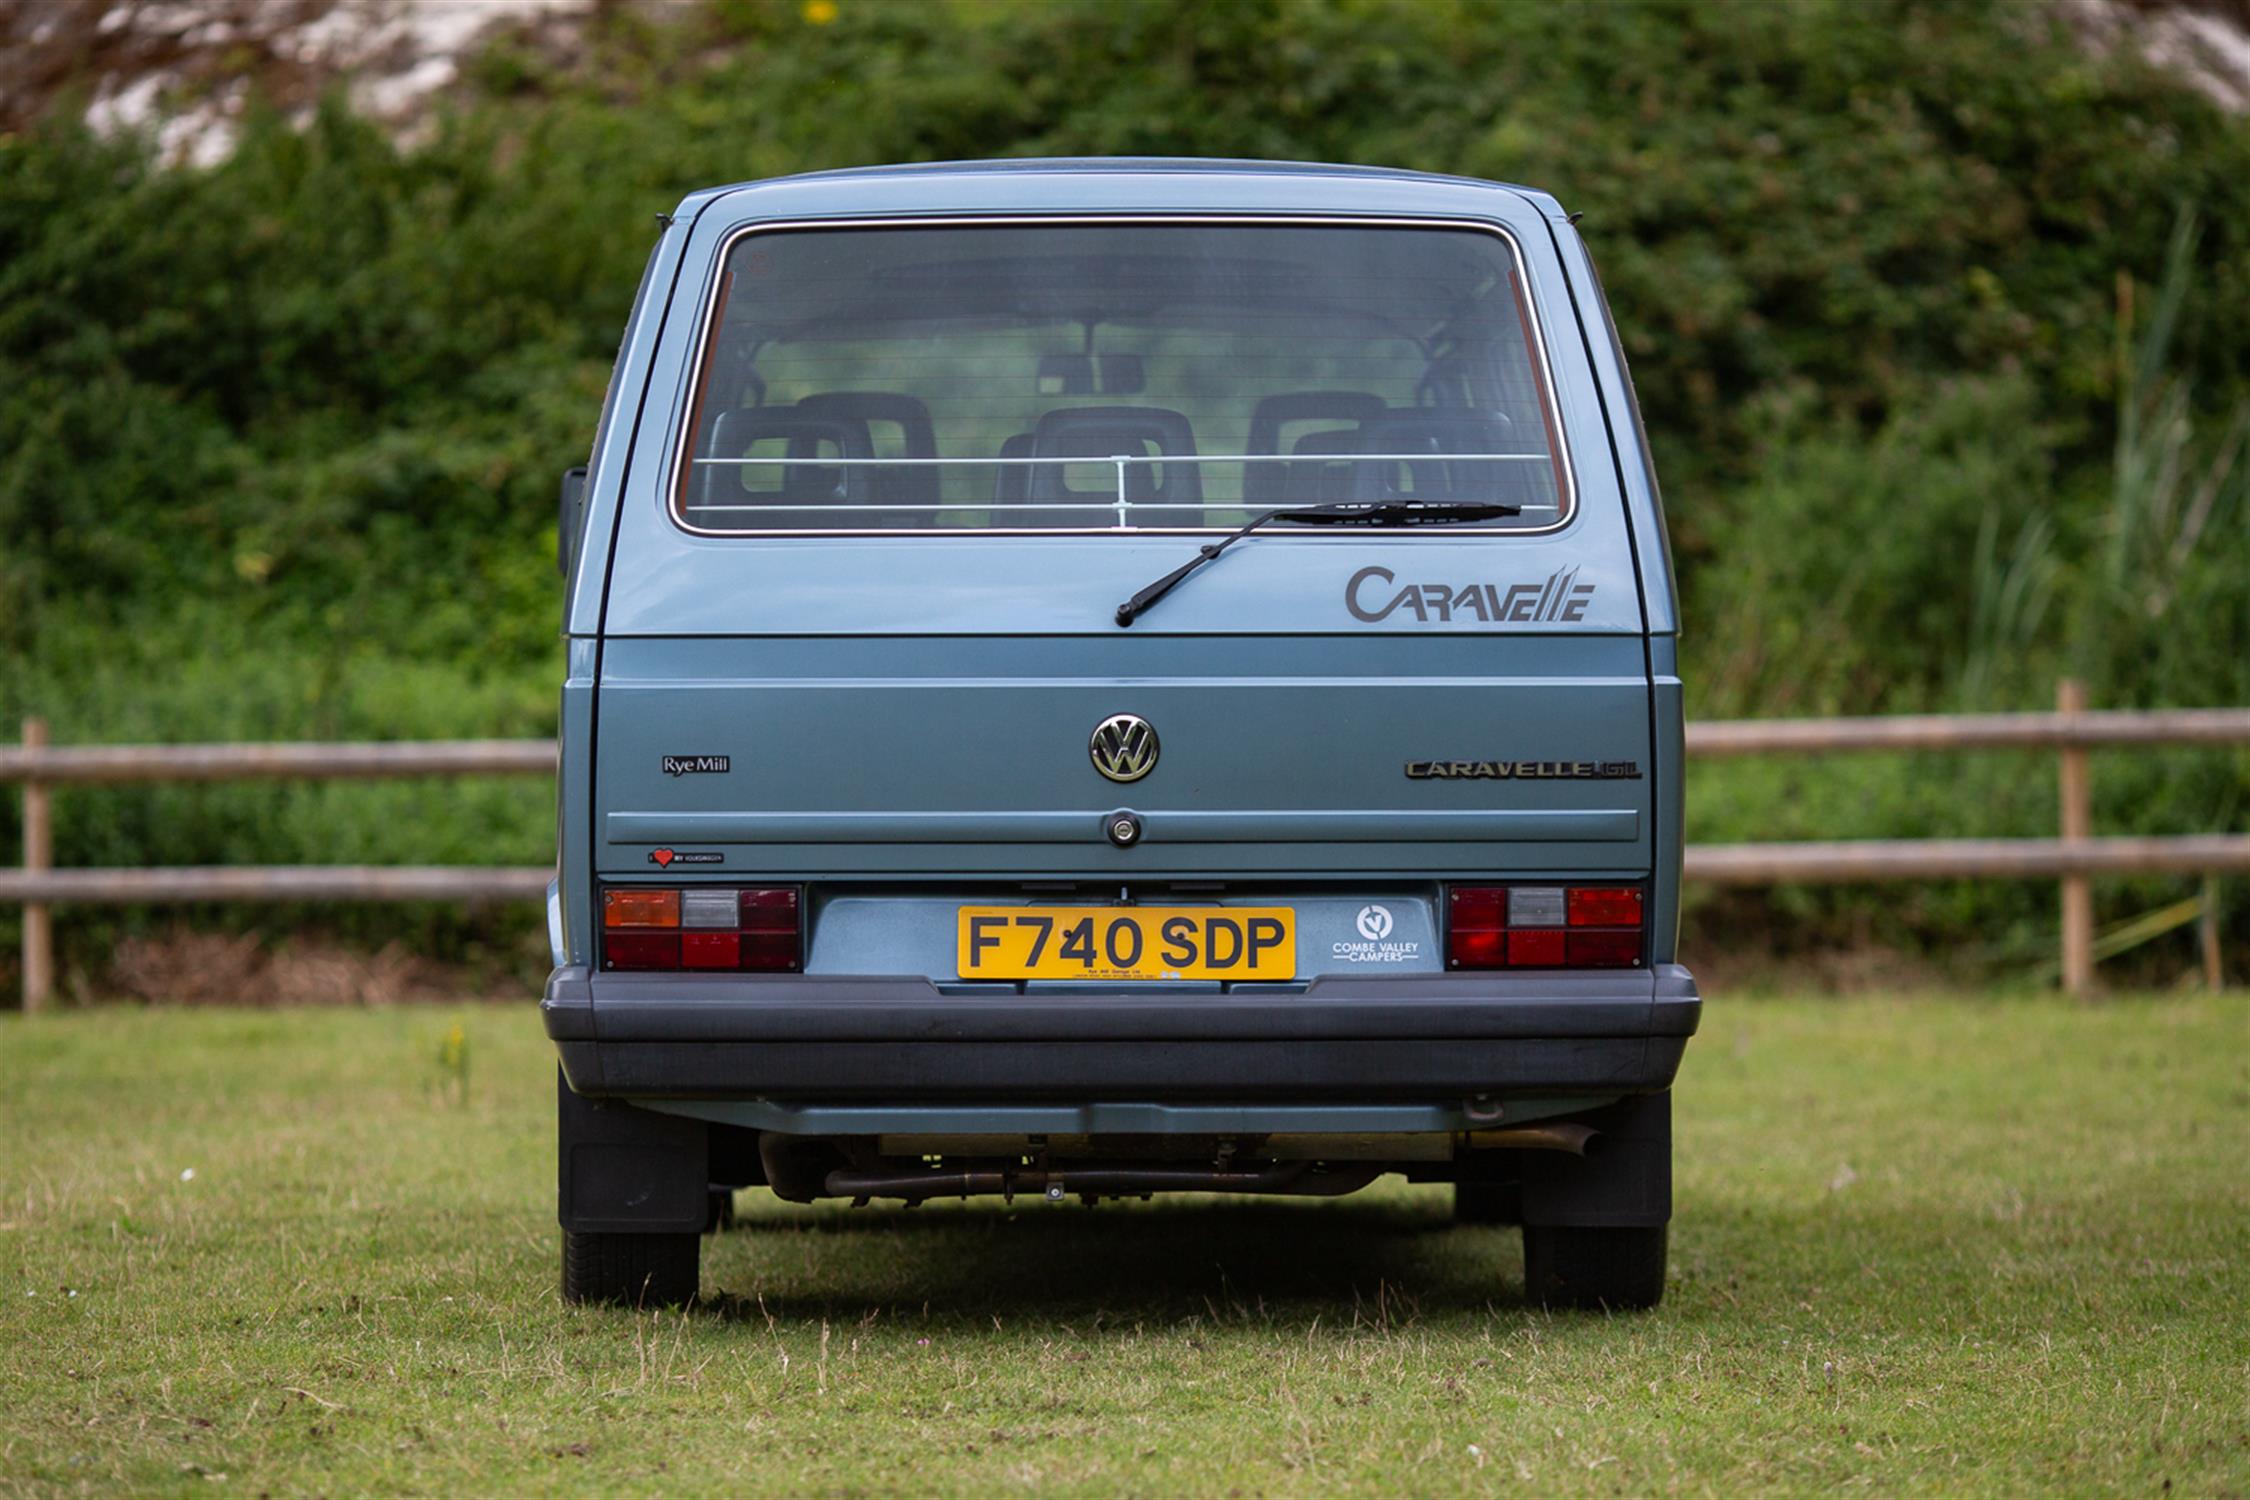 1989 Volkswagen Caravelle T3/Type 25 - 18,495 miles from new - Image 7 of 10